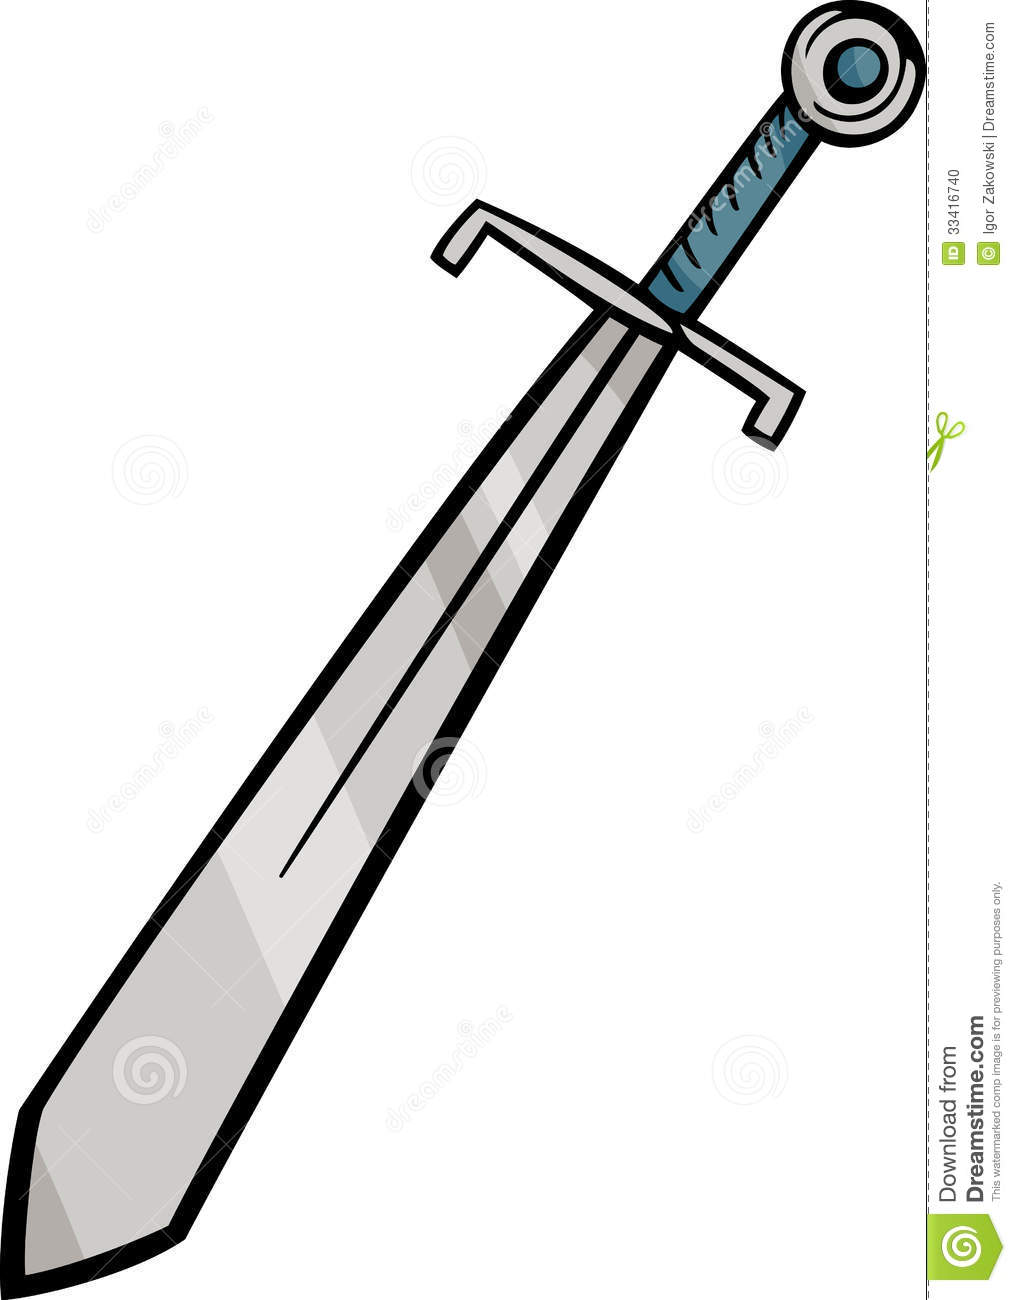 knight clipart u0026middot; weapon clipart